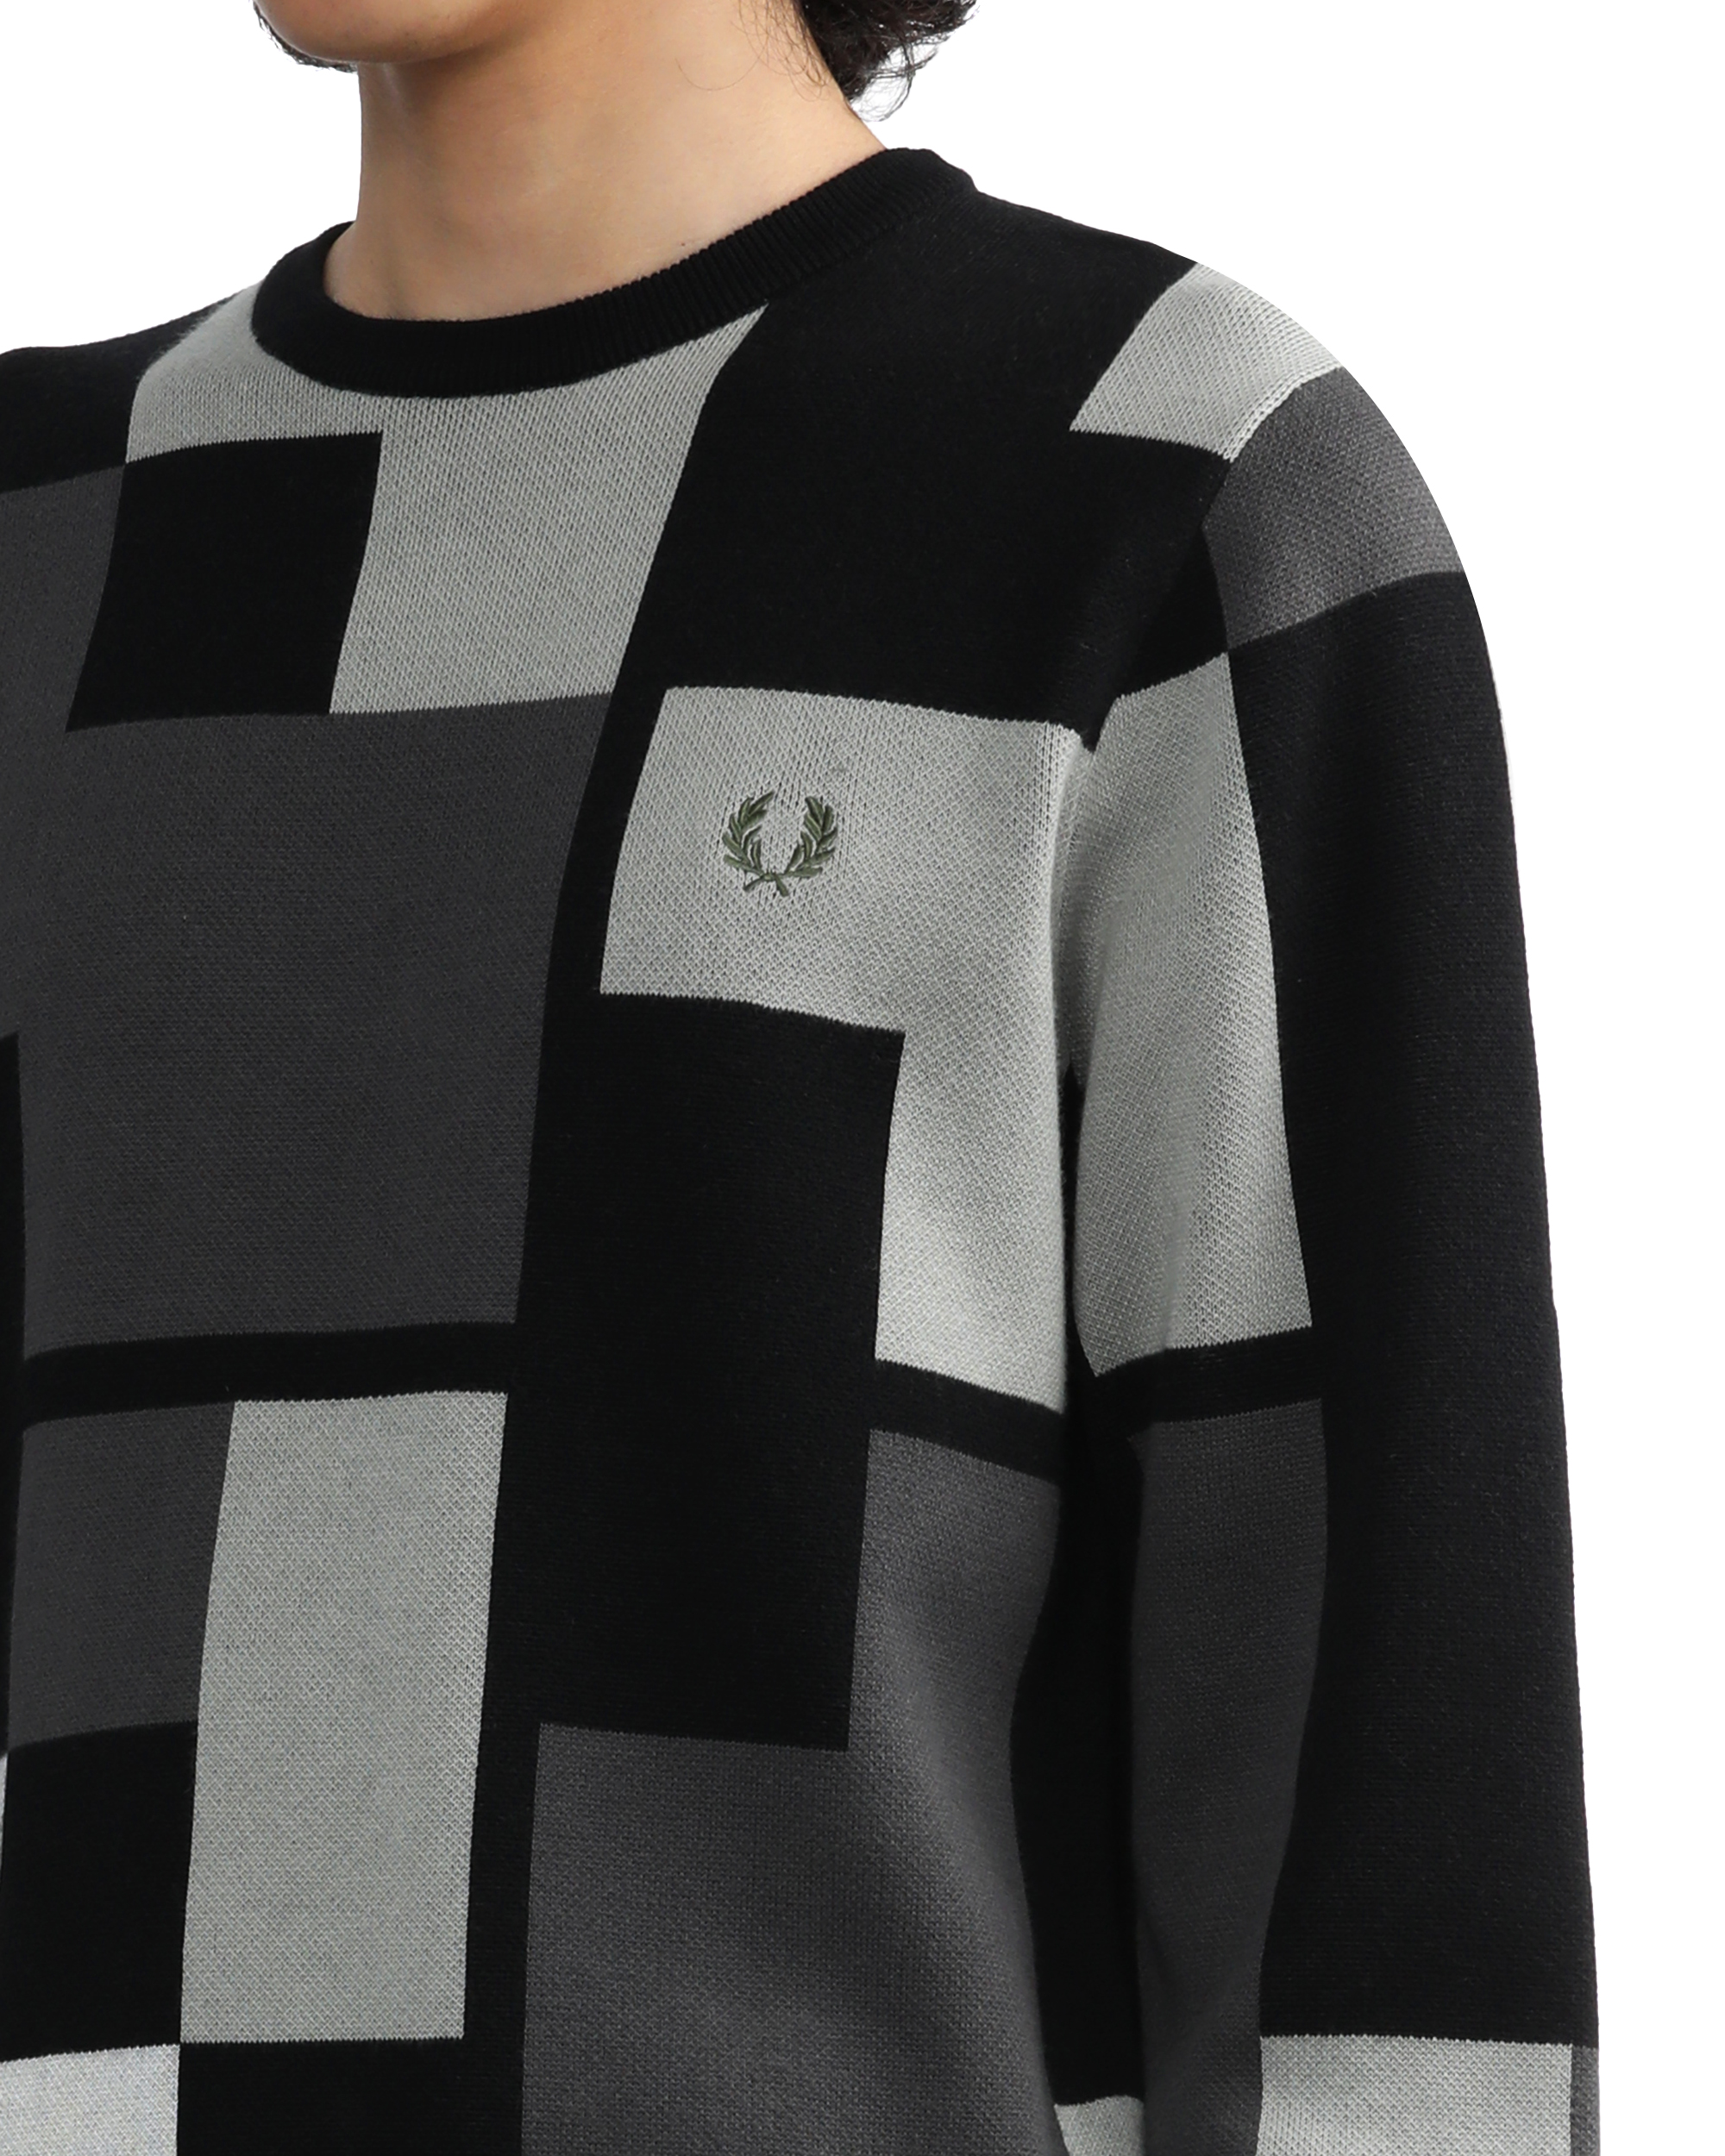 Fred Perry Pixel jacquard jumper | ITeSHOP